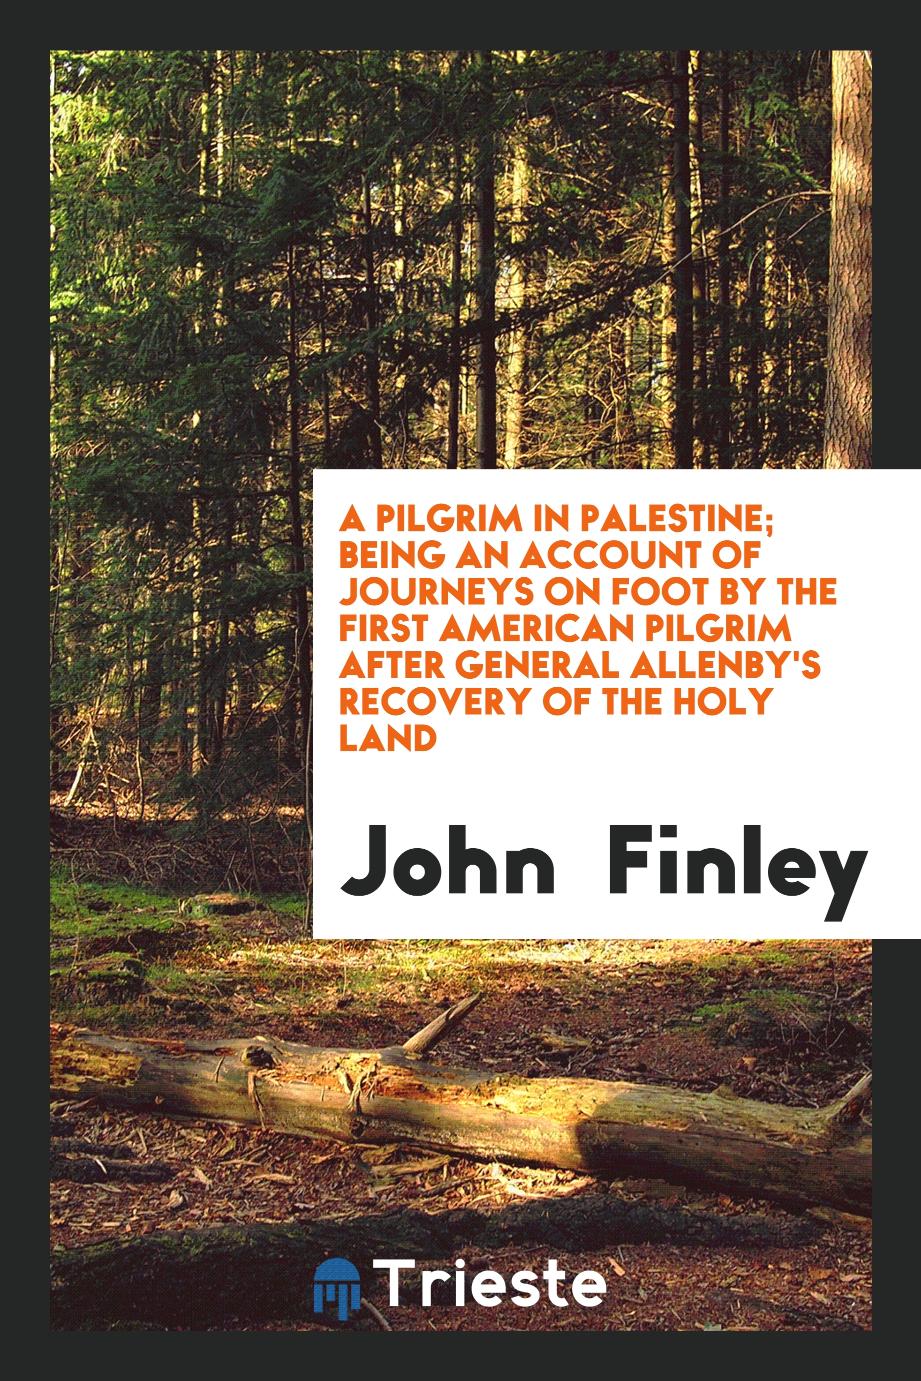 A Pilgrim in Palestine; Being an Account of Journeys on Foot by the First American Pilgrim After General Allenby's Recovery of the Holy Land